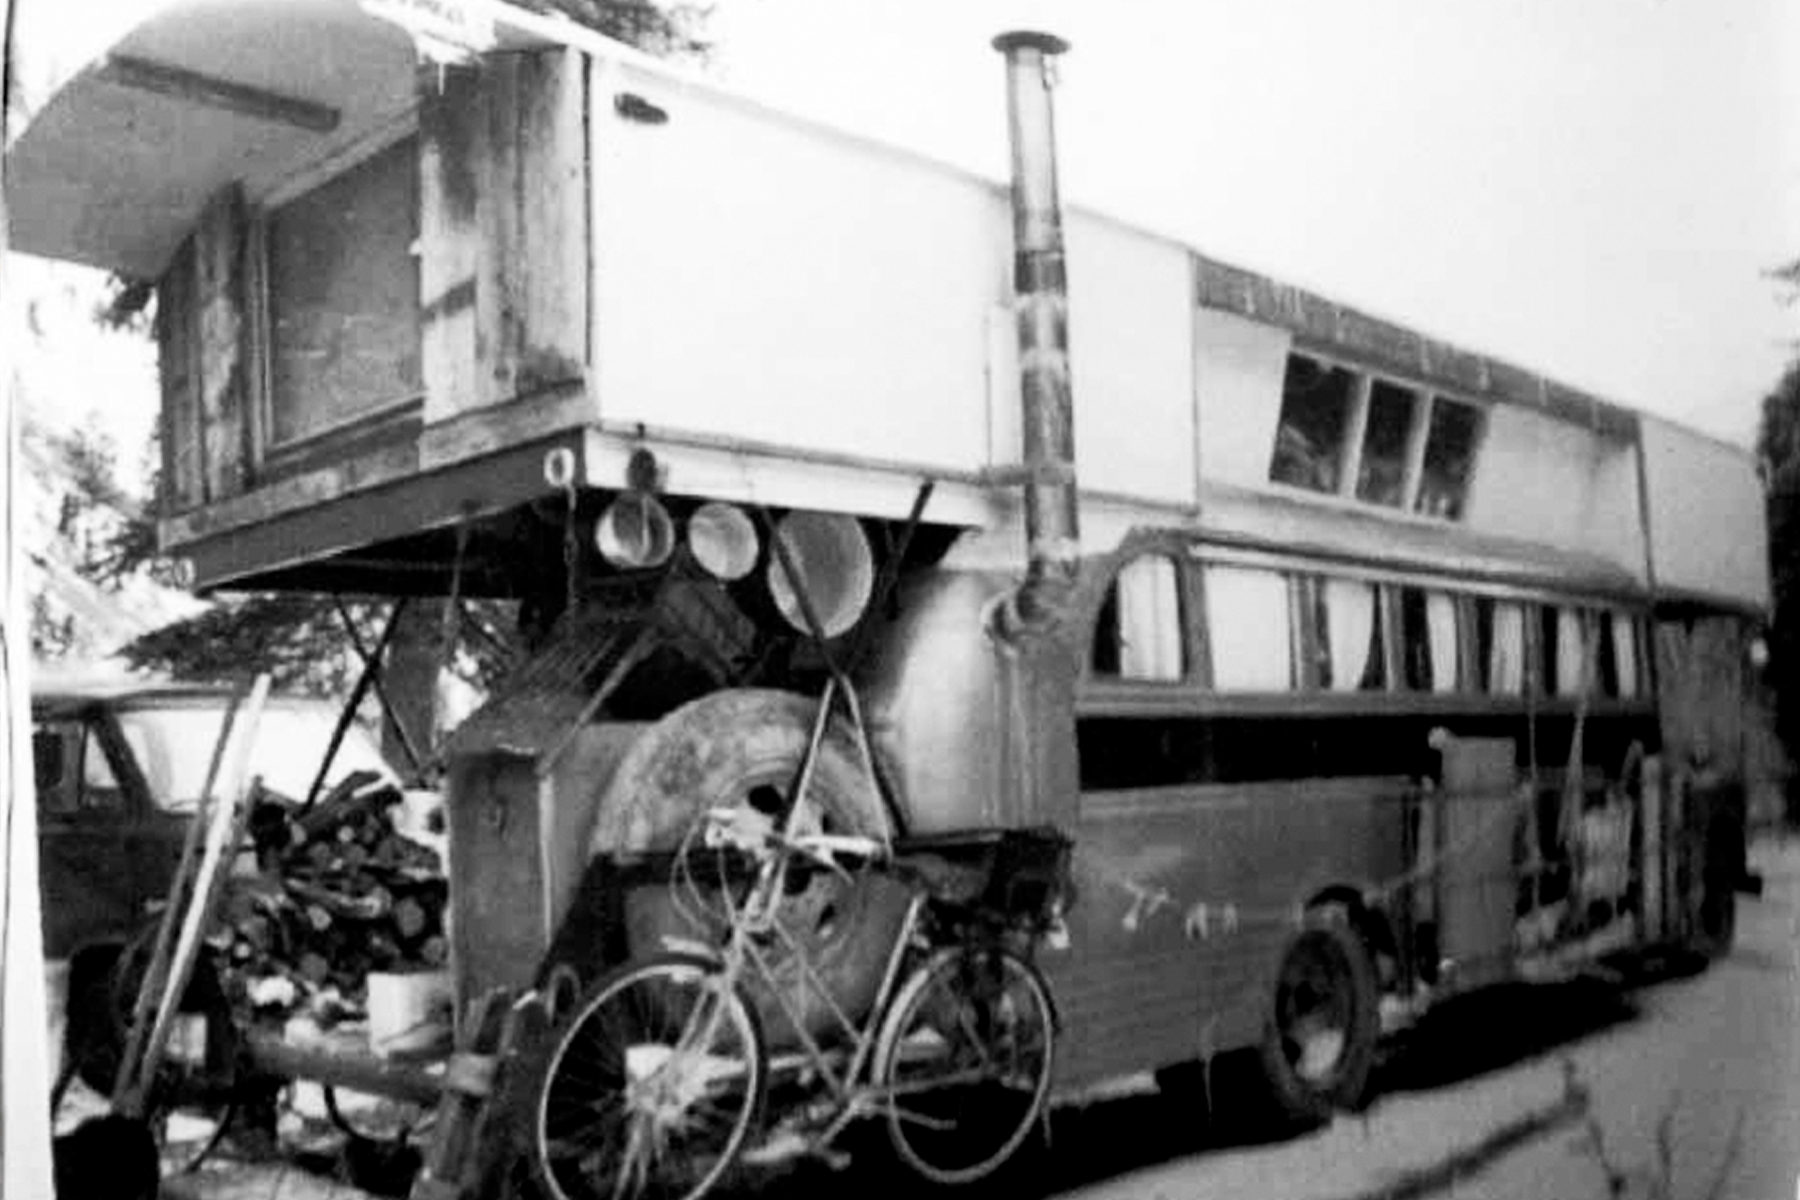 The bus Pillsbury and his family used to move from Detroit to California